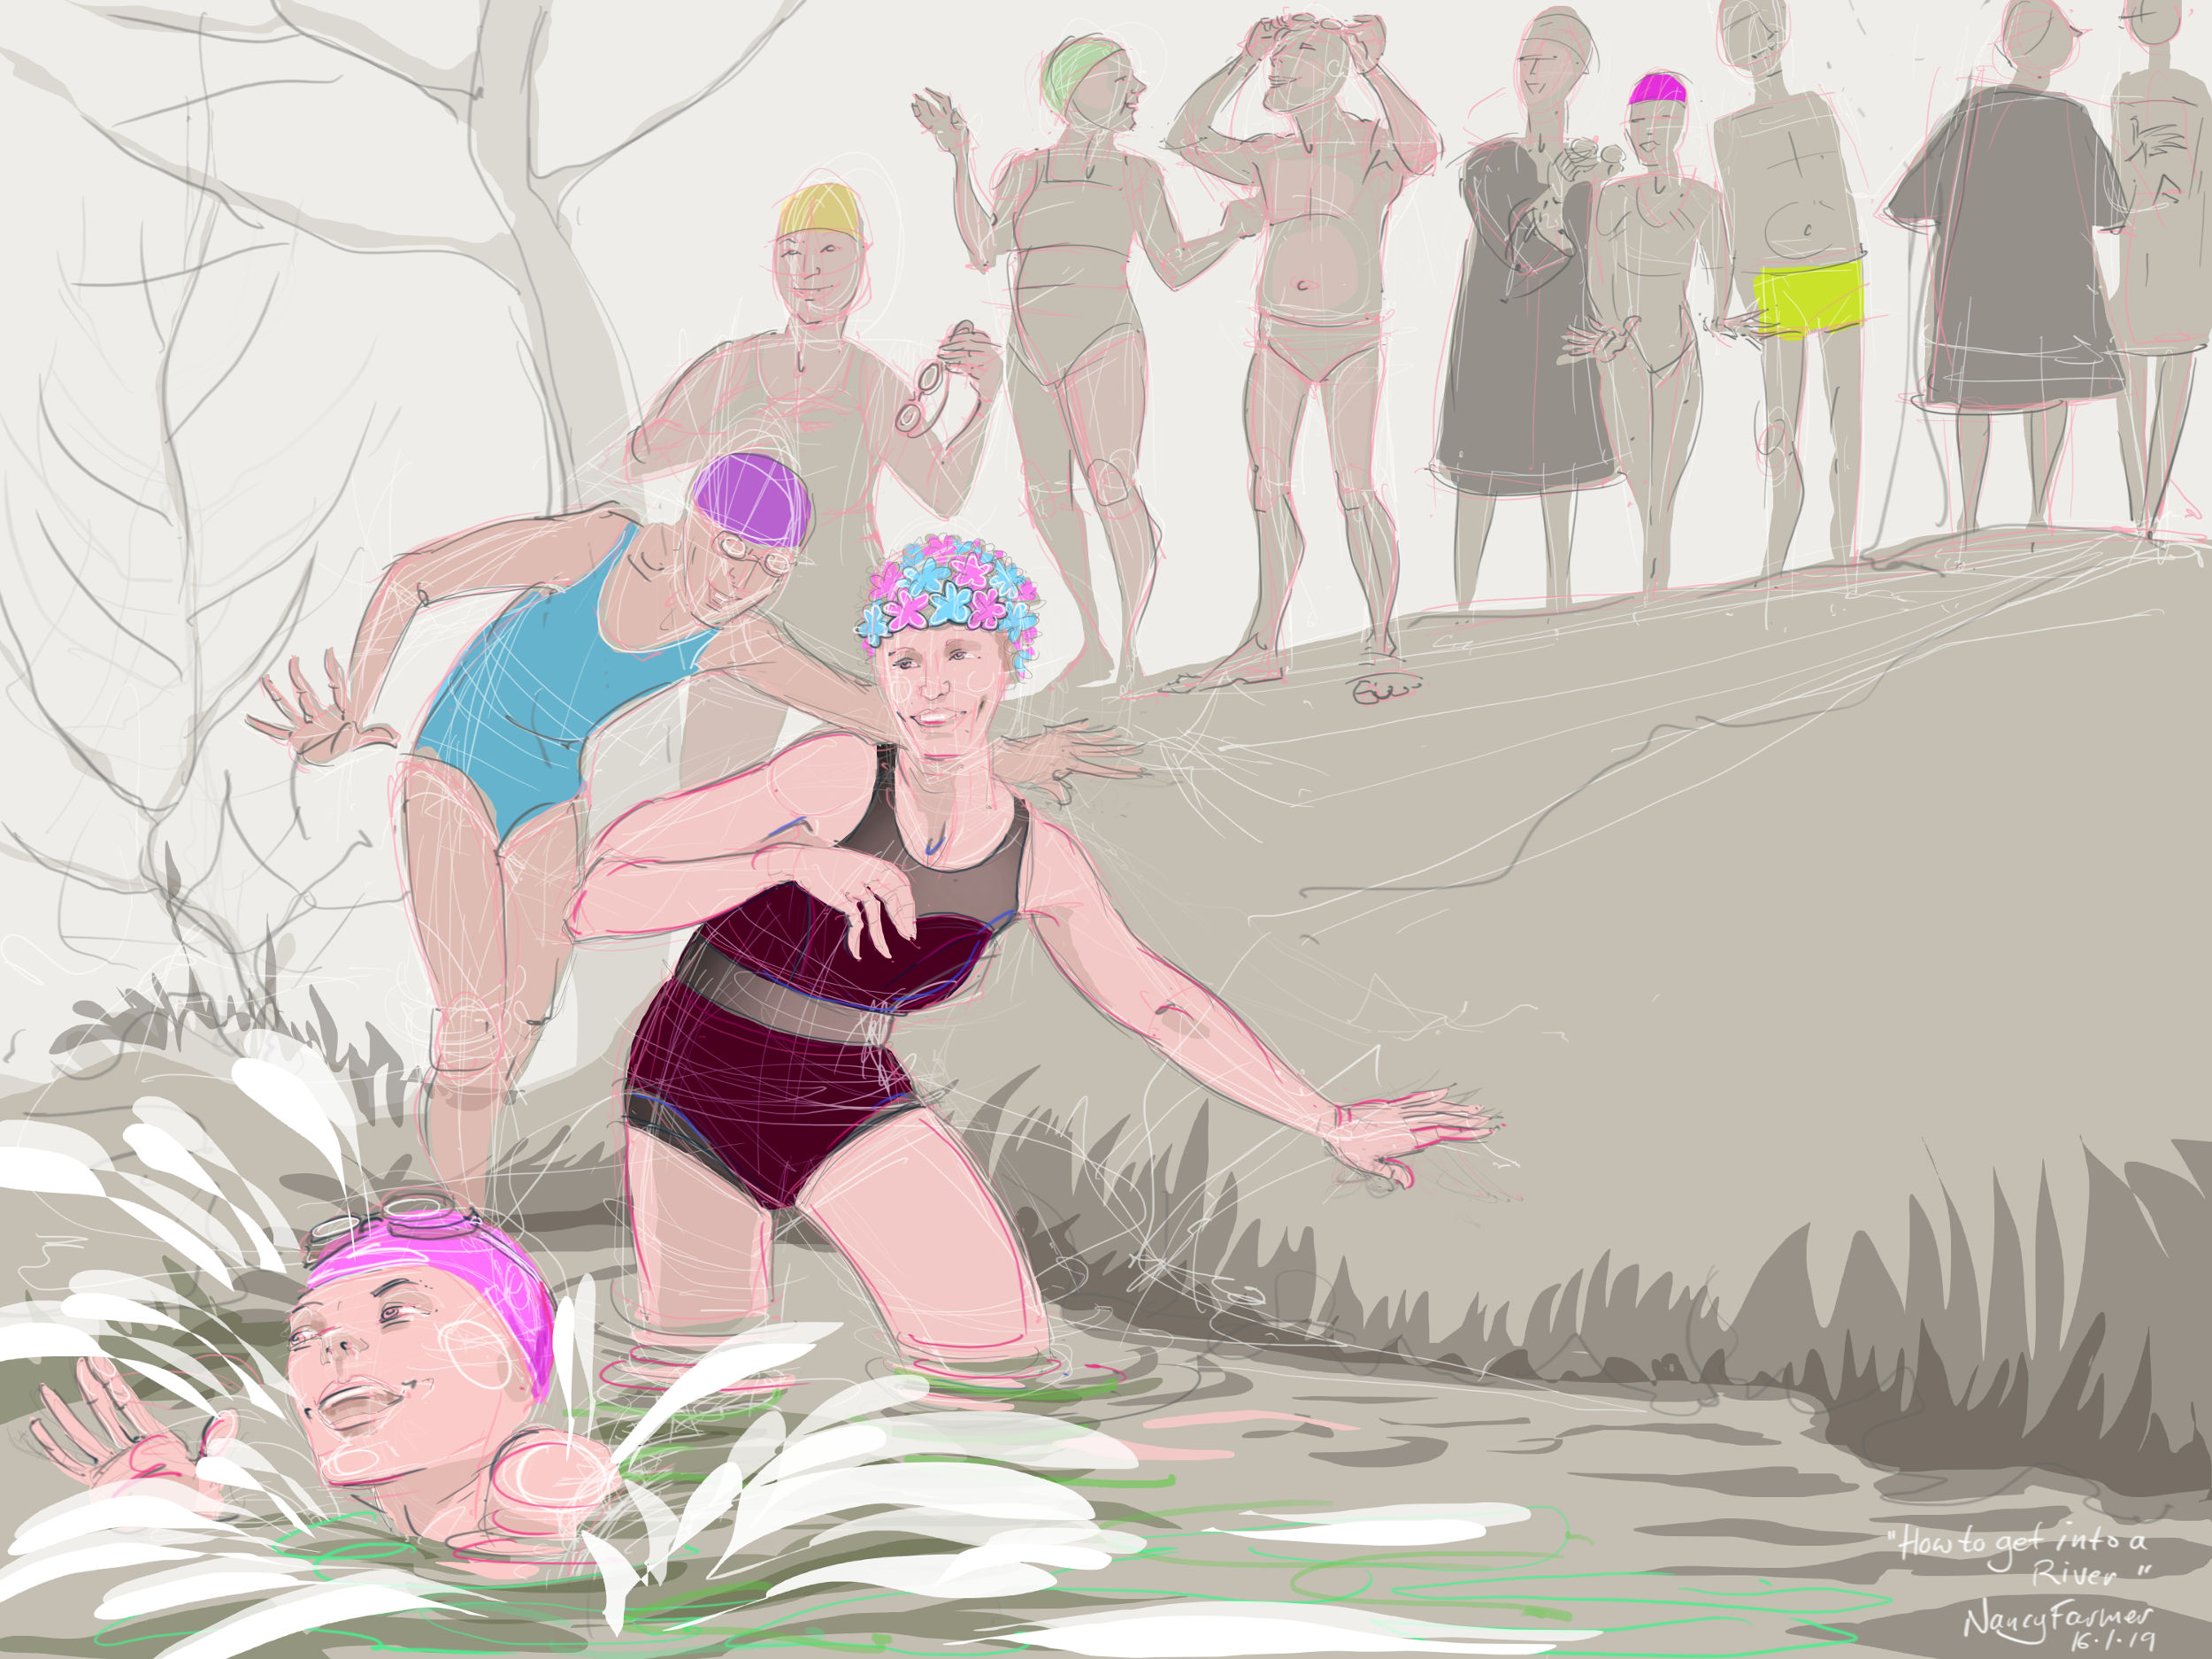 "How to get into a River" - digital drawing by Nancy Farmer